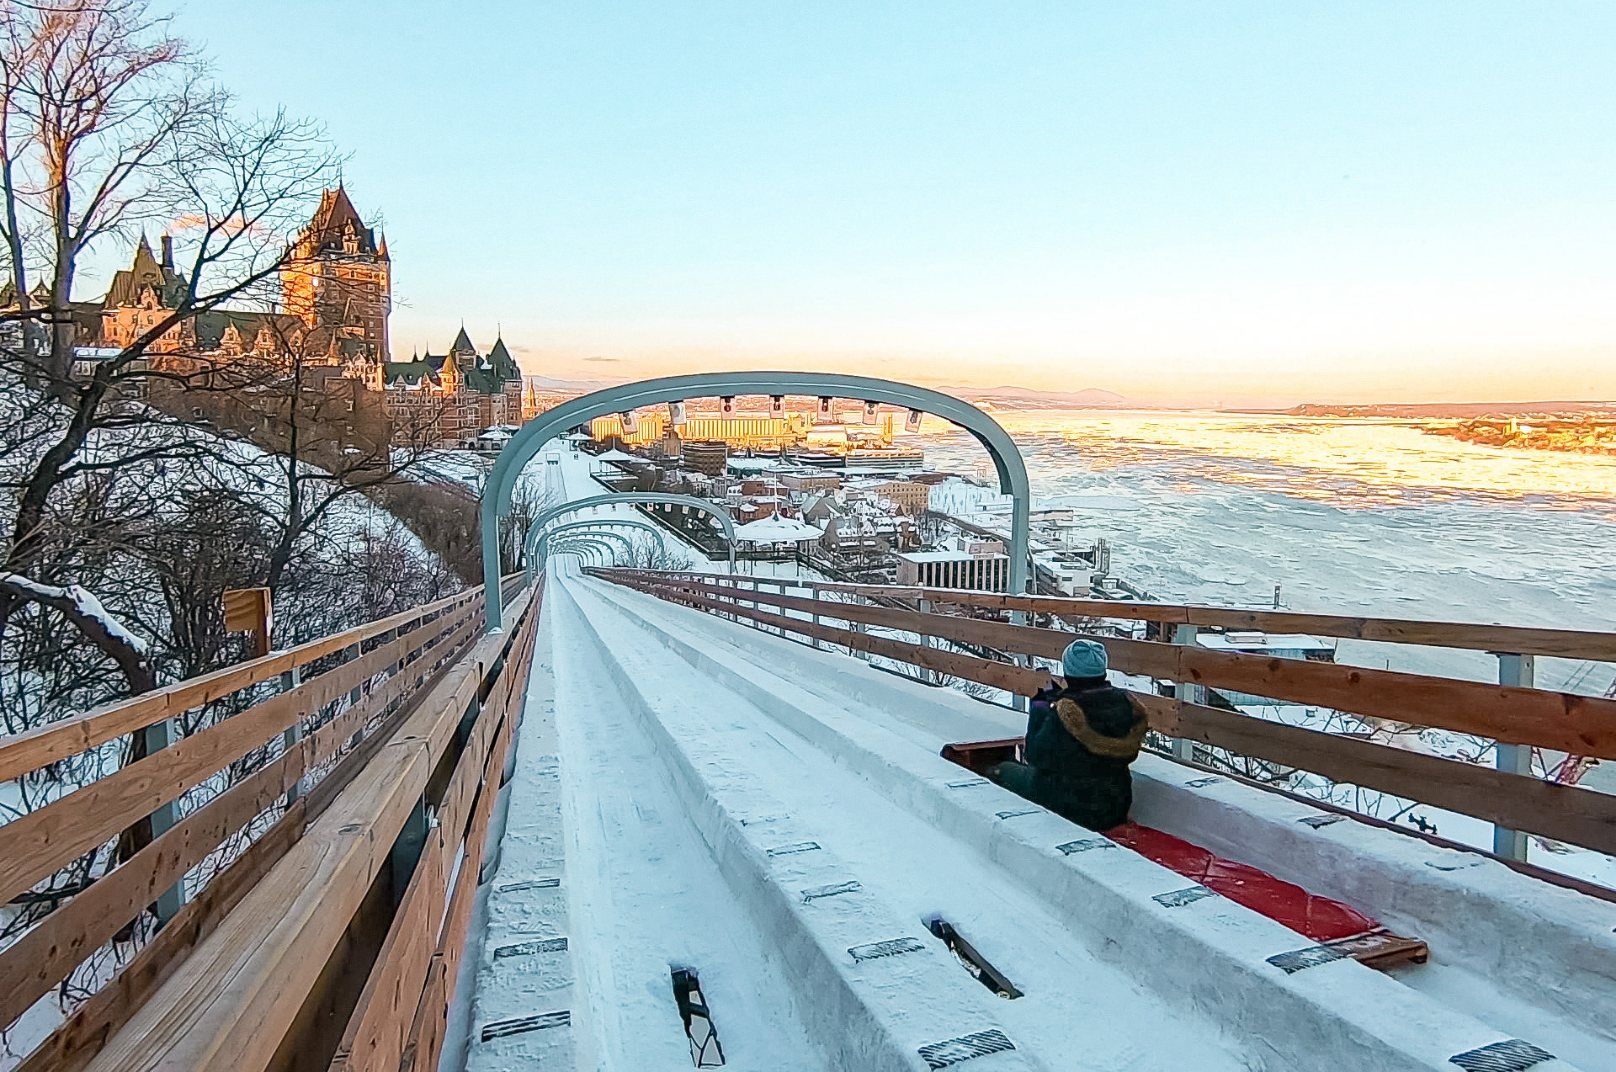 3-day trip to Quebec City